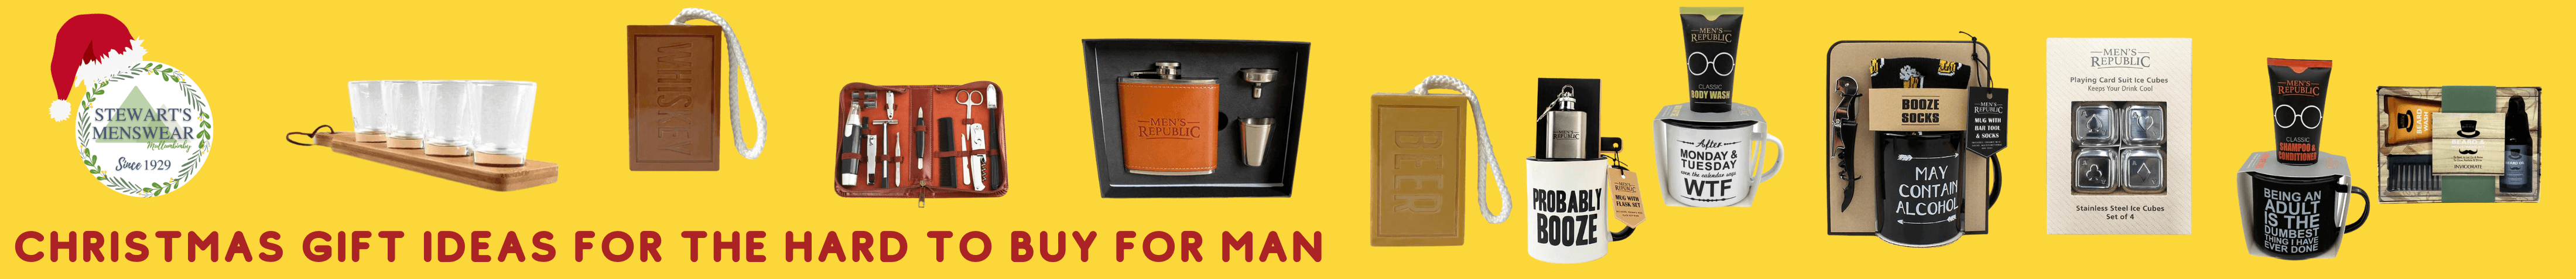 An assorted of gift ideas for the hard to buy for man including soap on a rope, novelty mugs with witty phrases, men's grooming kits, shot glasses, hip flask, and stainless steel ice cubes.